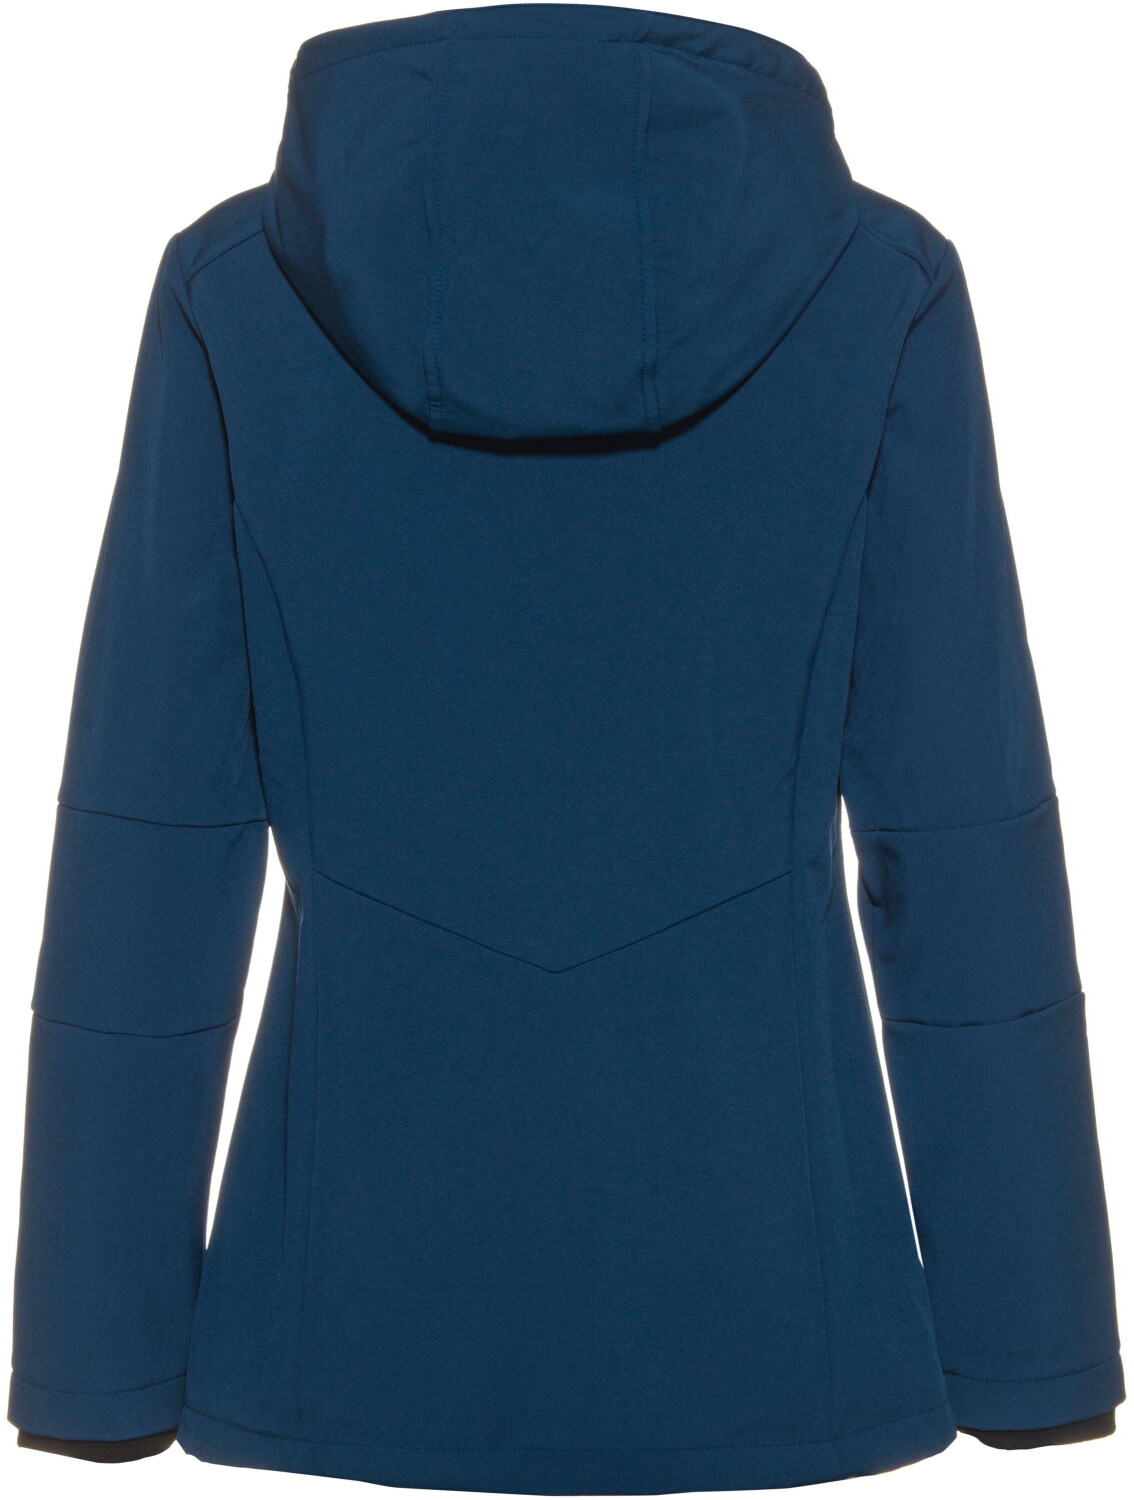 Softshell | With Jacket Woman blue 39,99 (3A22226) Long blue ink/cristal Fit Preisvergleich ab CMP bei Comfortable €